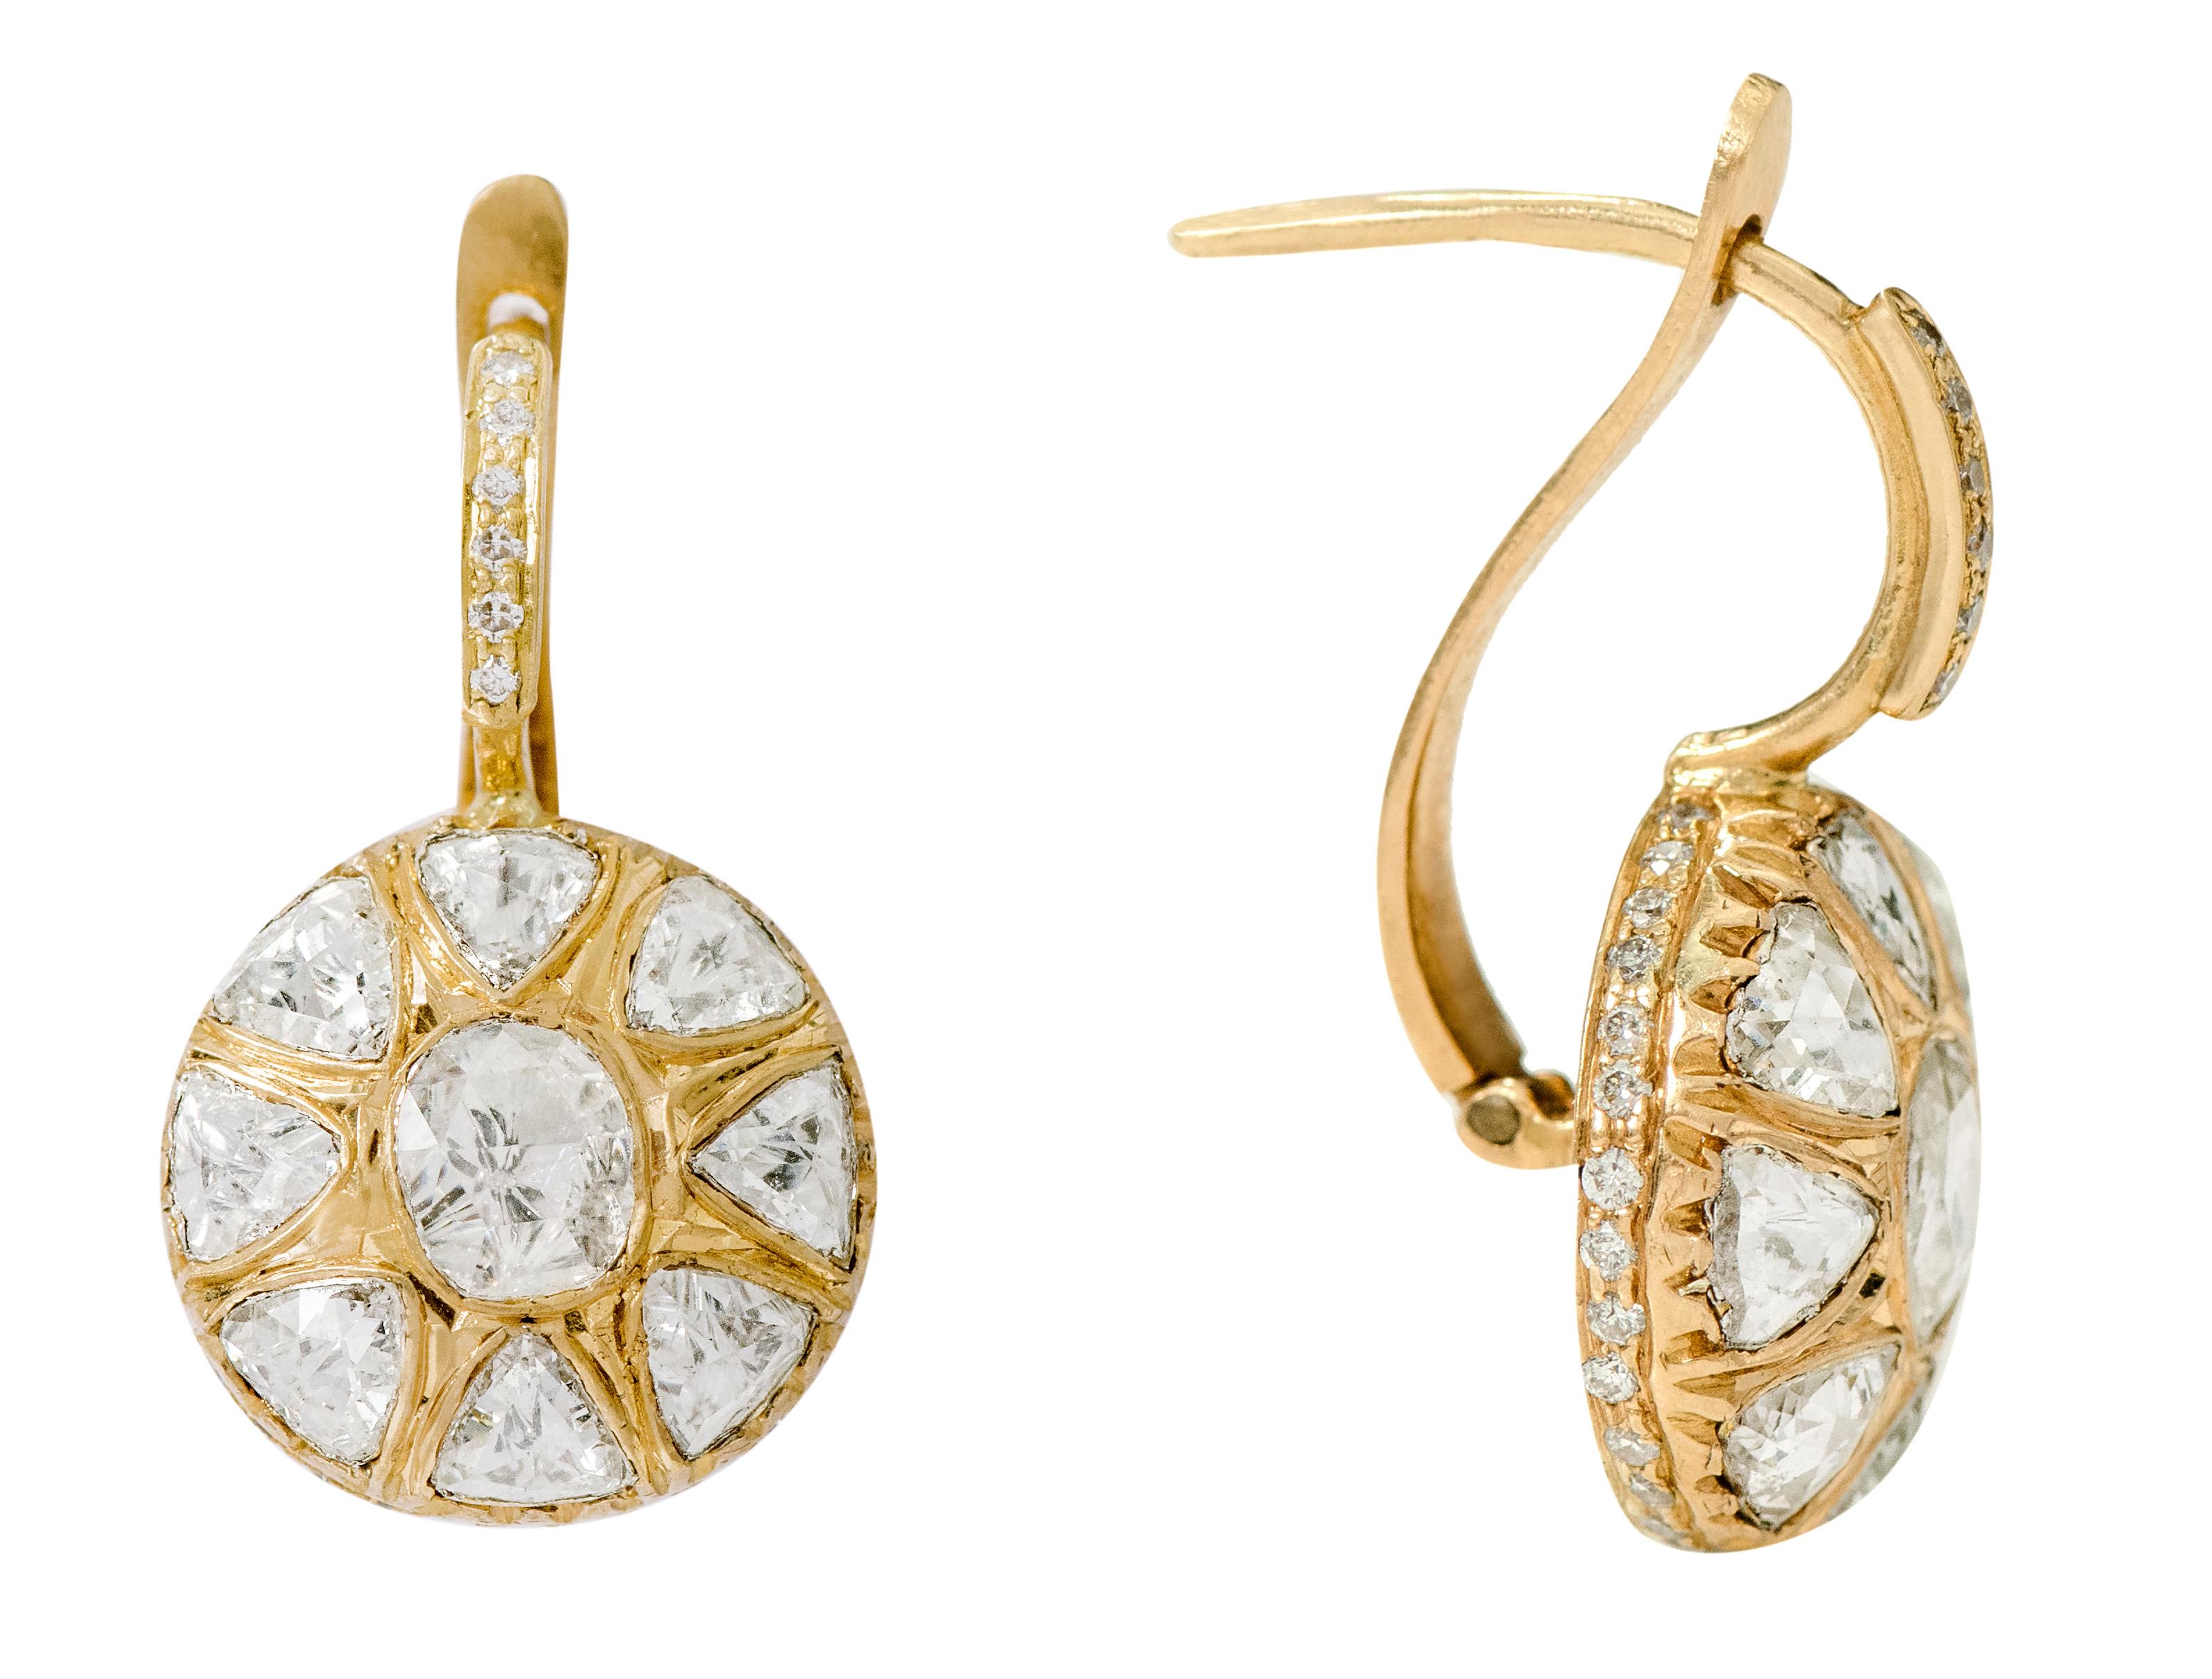 18 Karat Yellow Gold Rose-Cut Diamond Dangle Earrings in Art-Deco Style

This Victorian period art-deco style atypical rose-cut diamond earring is royal. The uneven uniquely cut matching triangle shaped rose cut diamond solitaire set in bezel